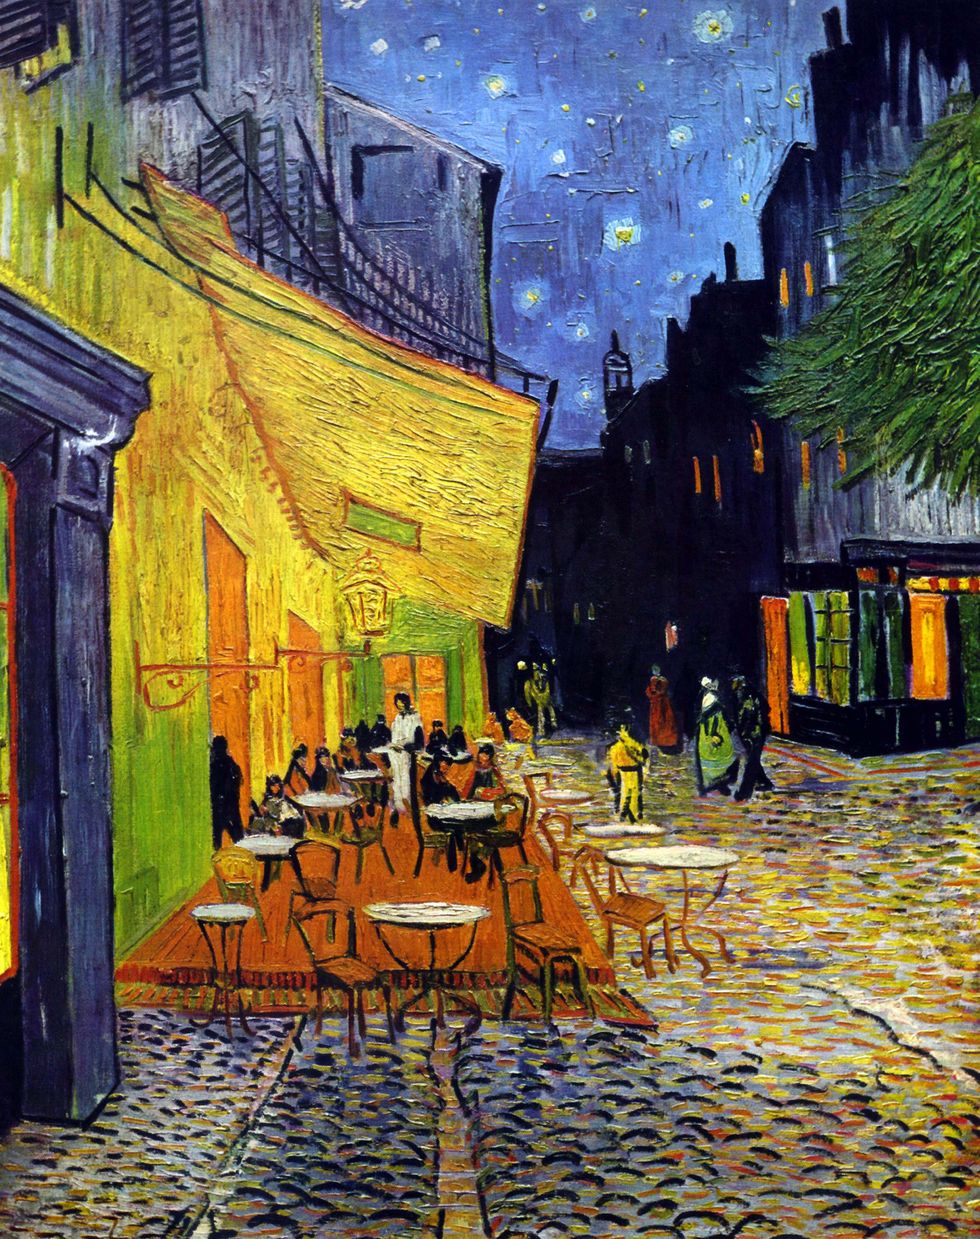 cafe terrace at night, vincent van gogh, 1888 photo by universal history archiveuniversal images group via getty images